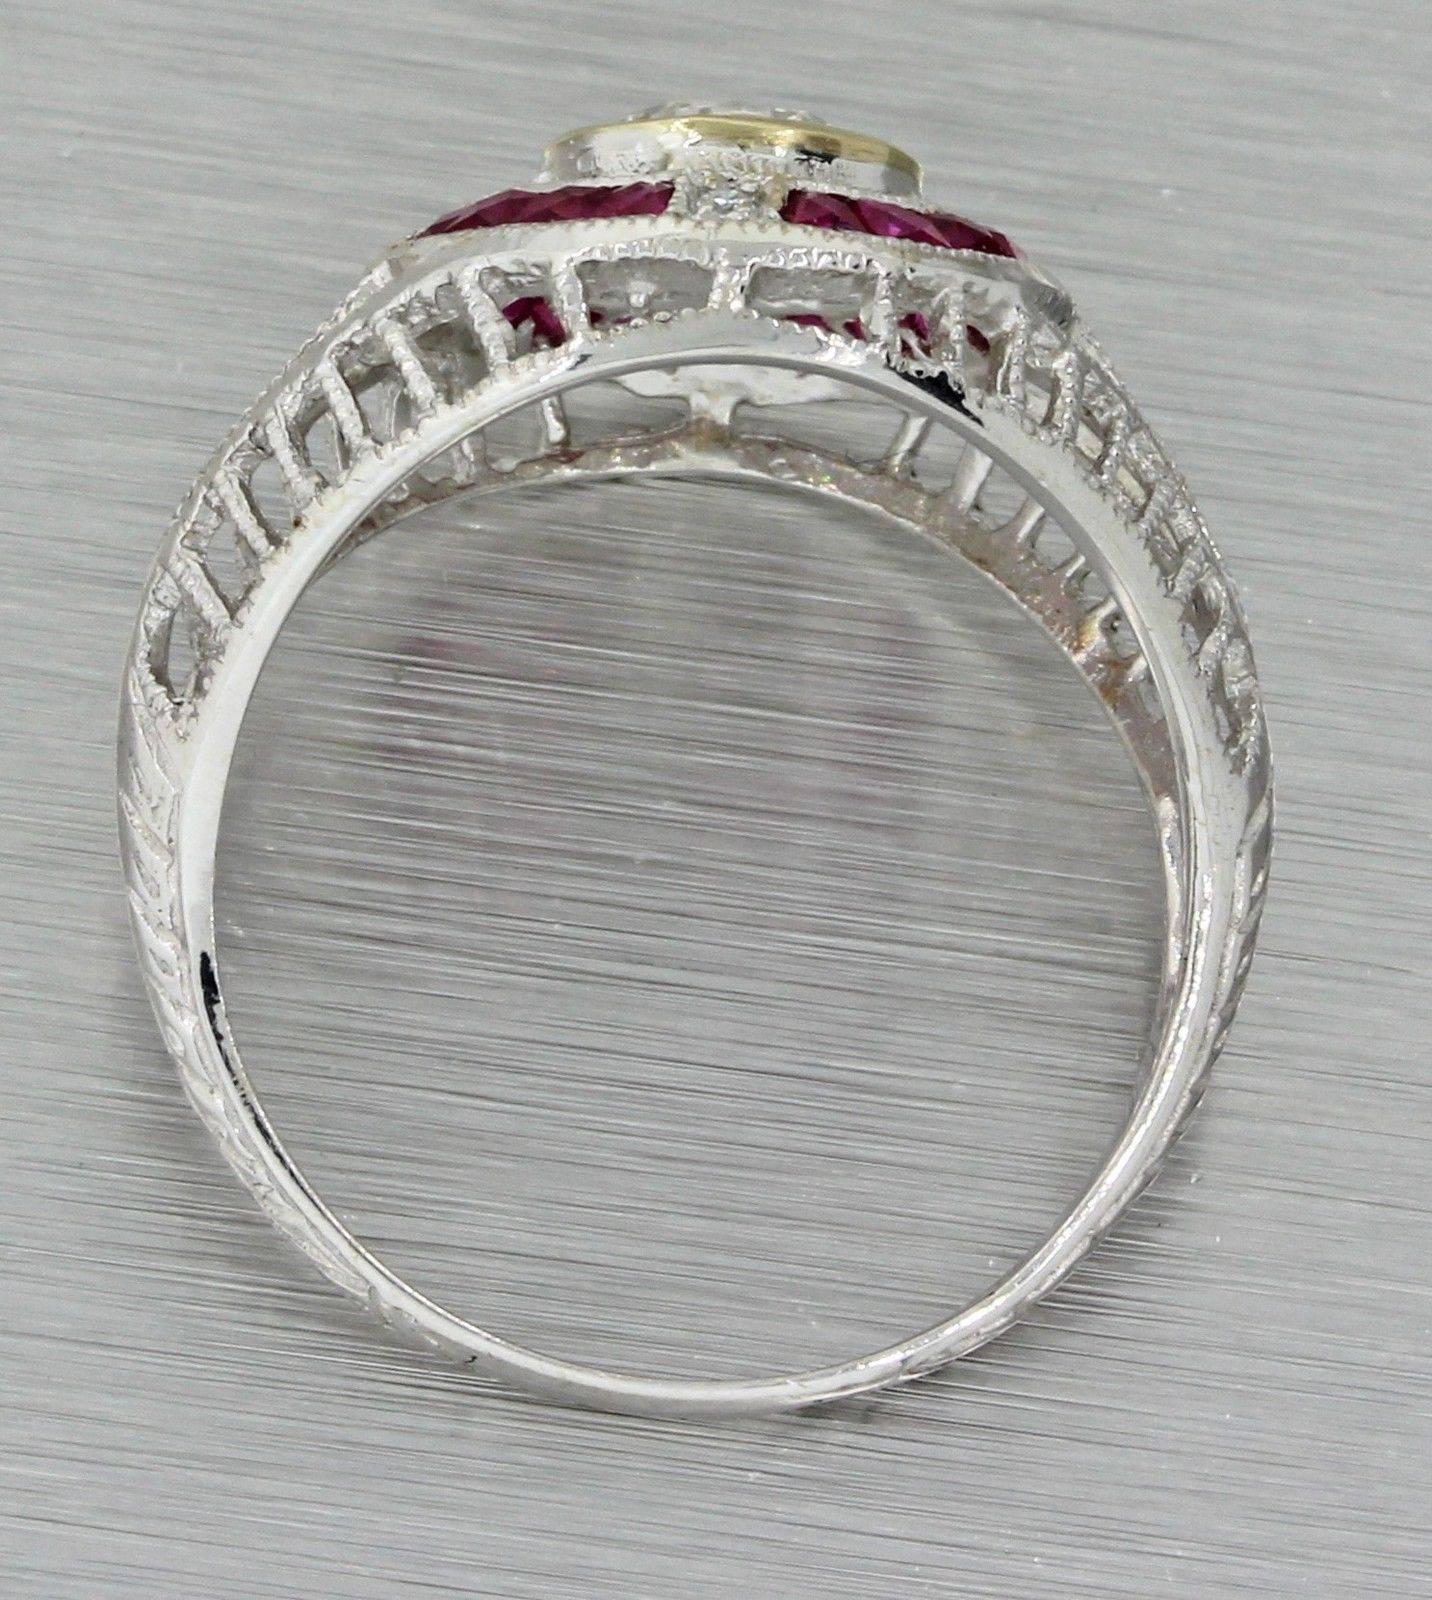 1930s Art Deco 1.05 Carat Diamond Ruby Solid Gold Engagement Ring EGL In Excellent Condition For Sale In Huntington, NY